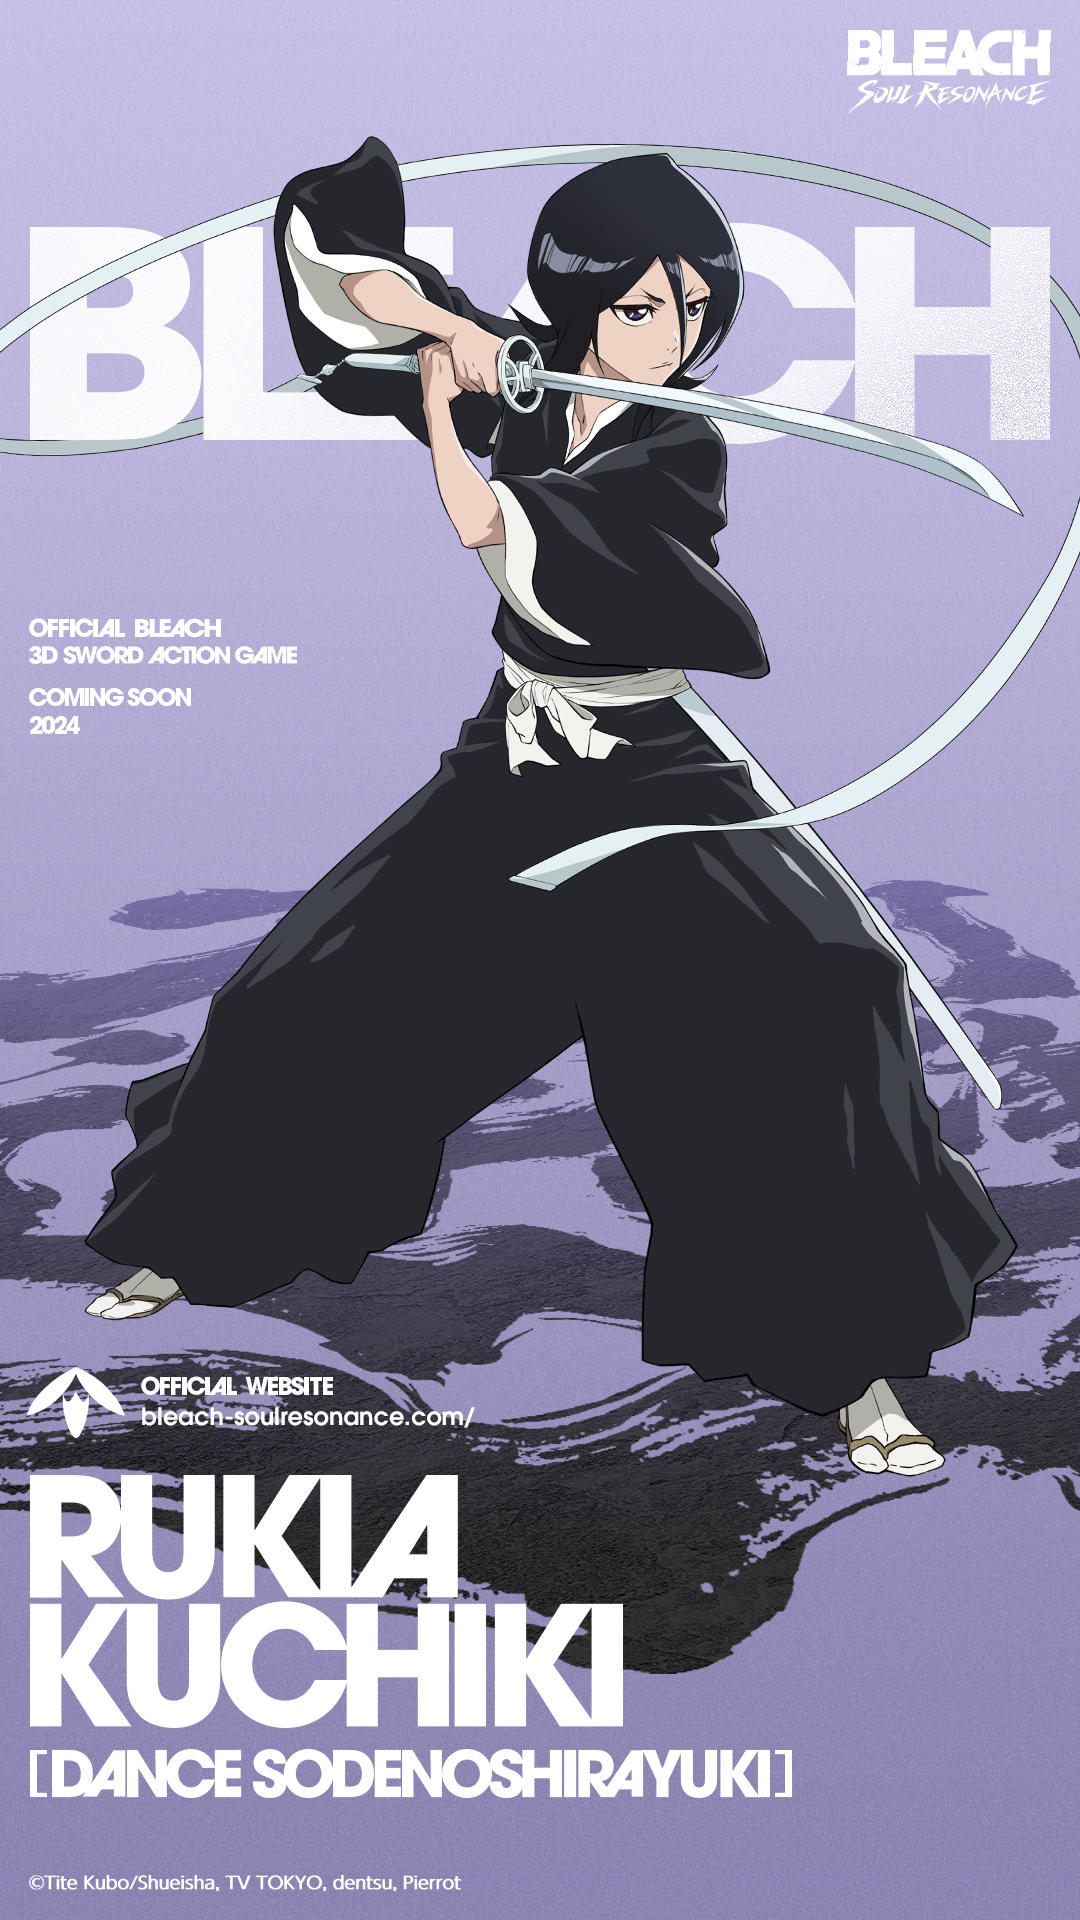 A new chapter unfolds – exciting launch of Bleach: Soul Resonance and  BloodWarfare season2 premiere! - BLEACH: Soul Resonance - TapTap